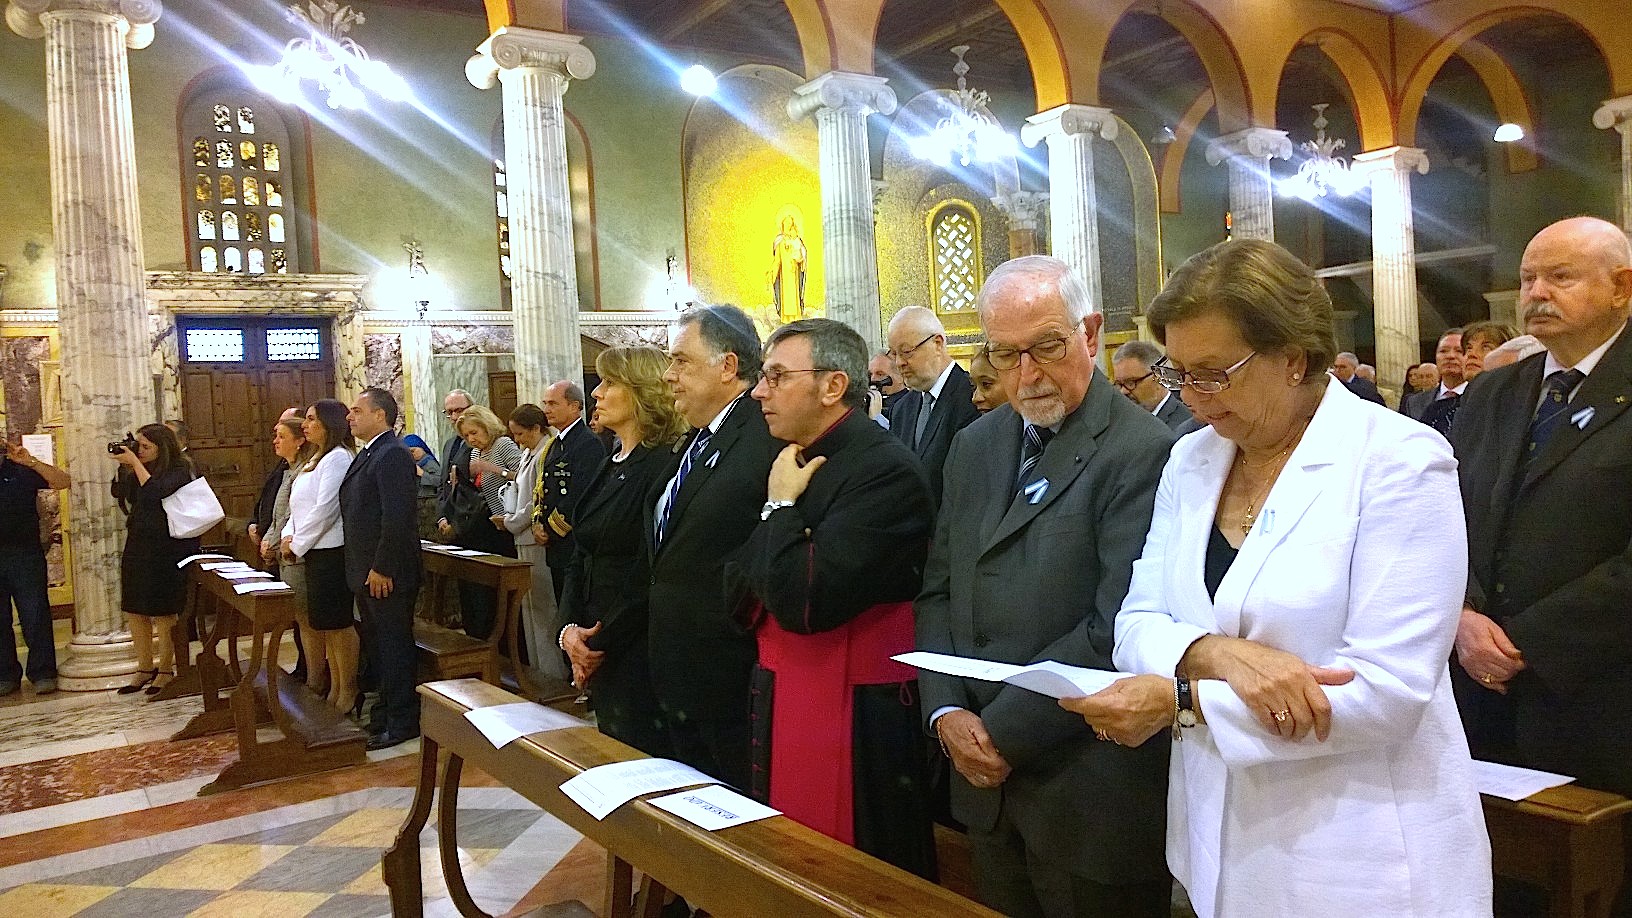 Holy mass in the National church of Argentina in Rome